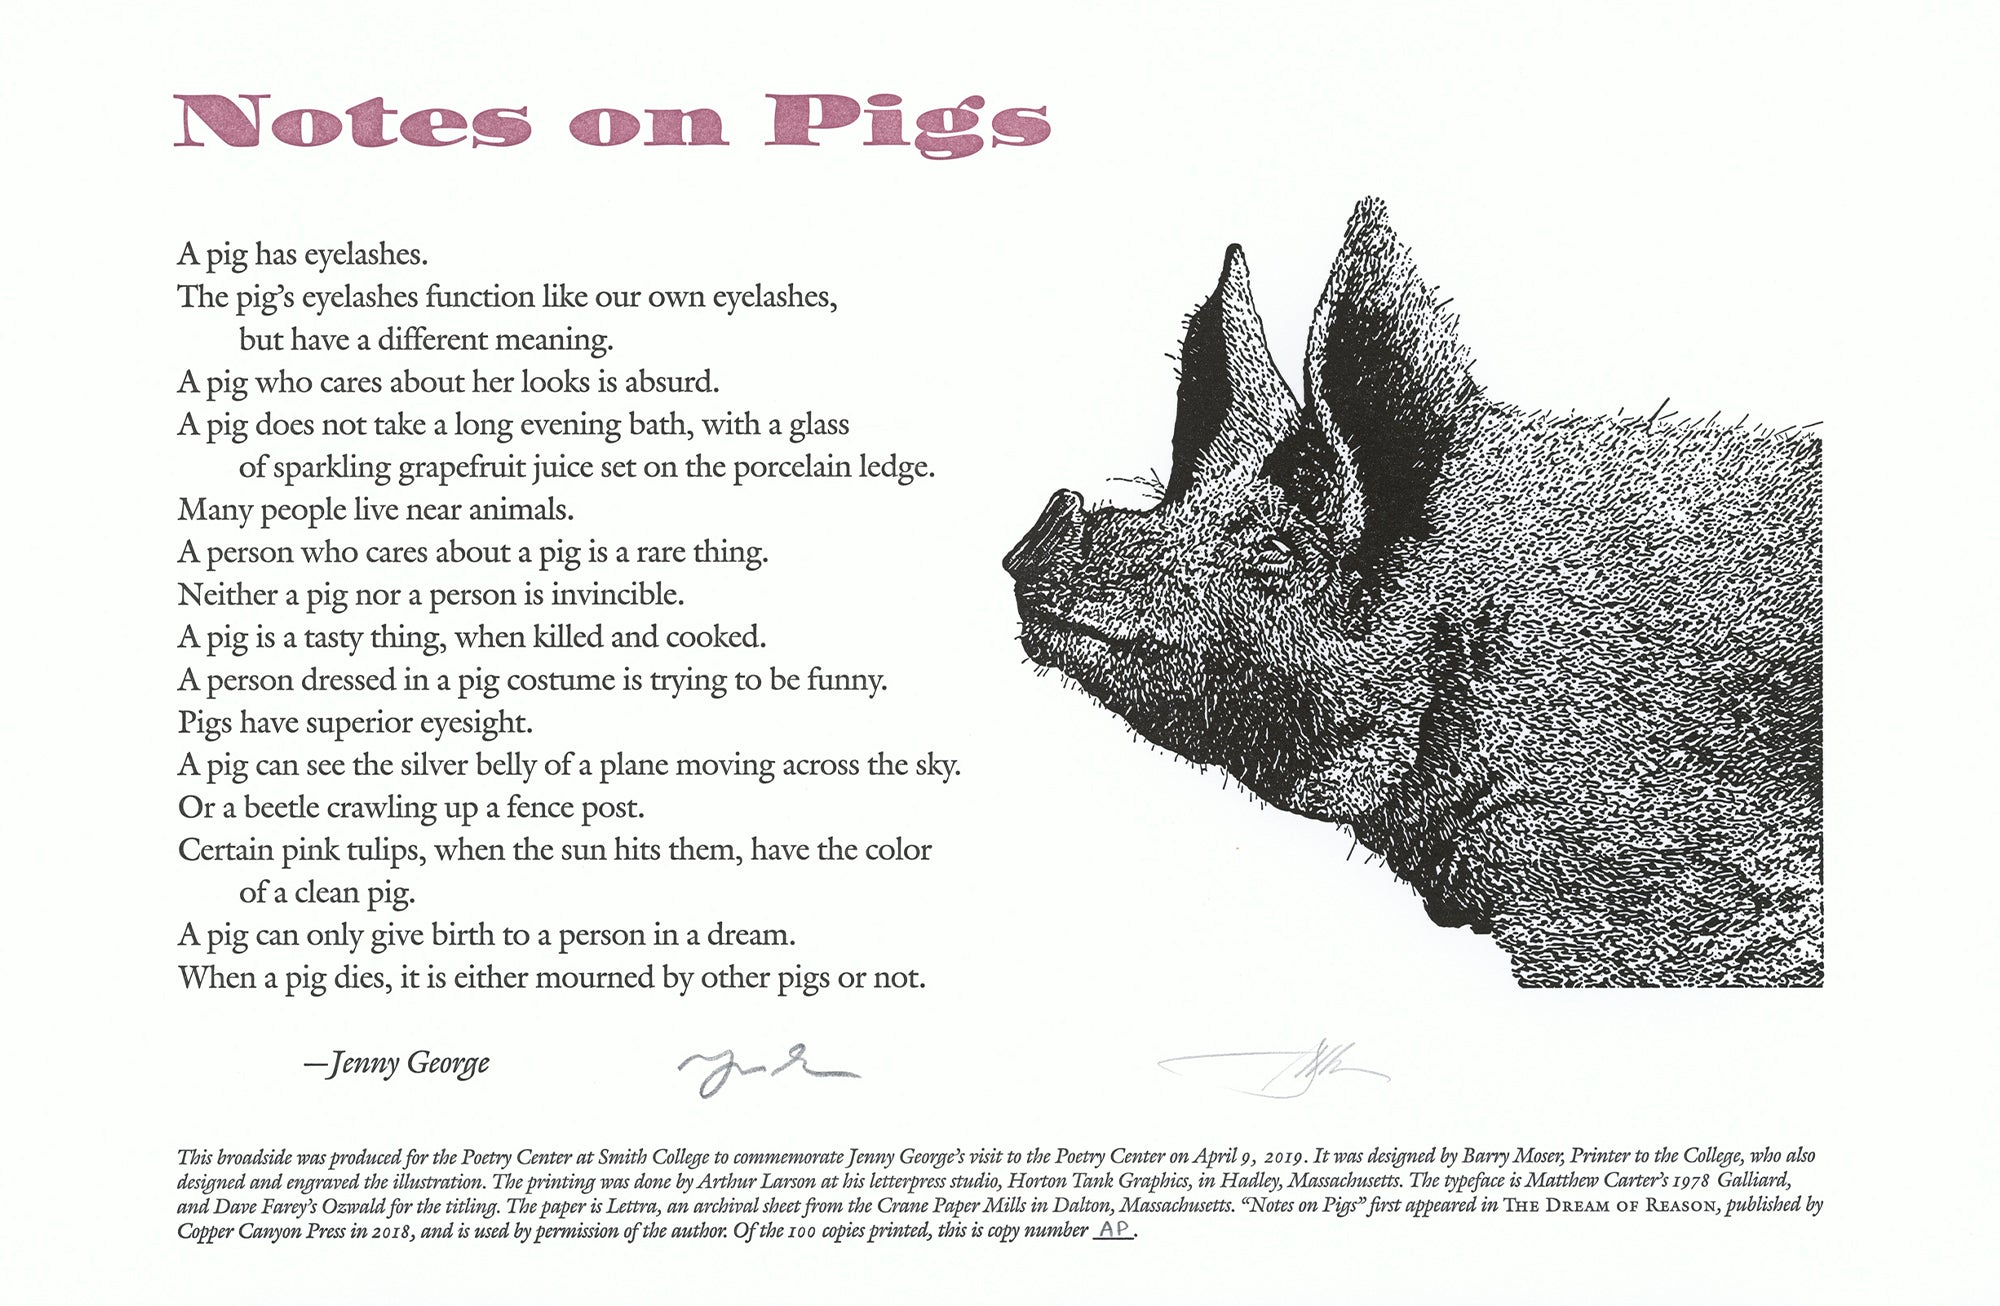 Jenny George "Notes on Pigs" / Barry Moser Broadside